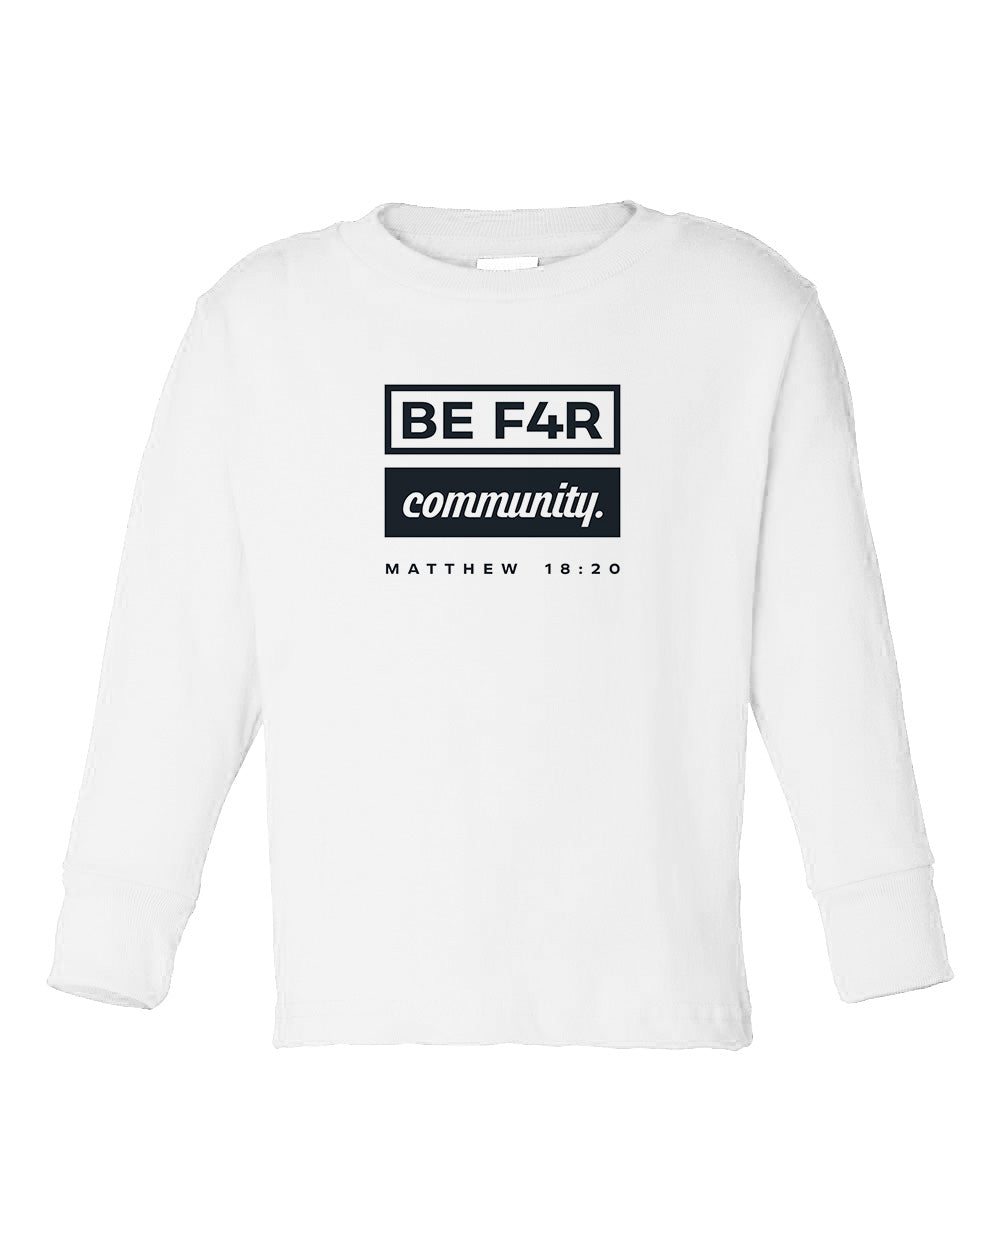 BE F4R Community 2 Toddler Long Sleeve